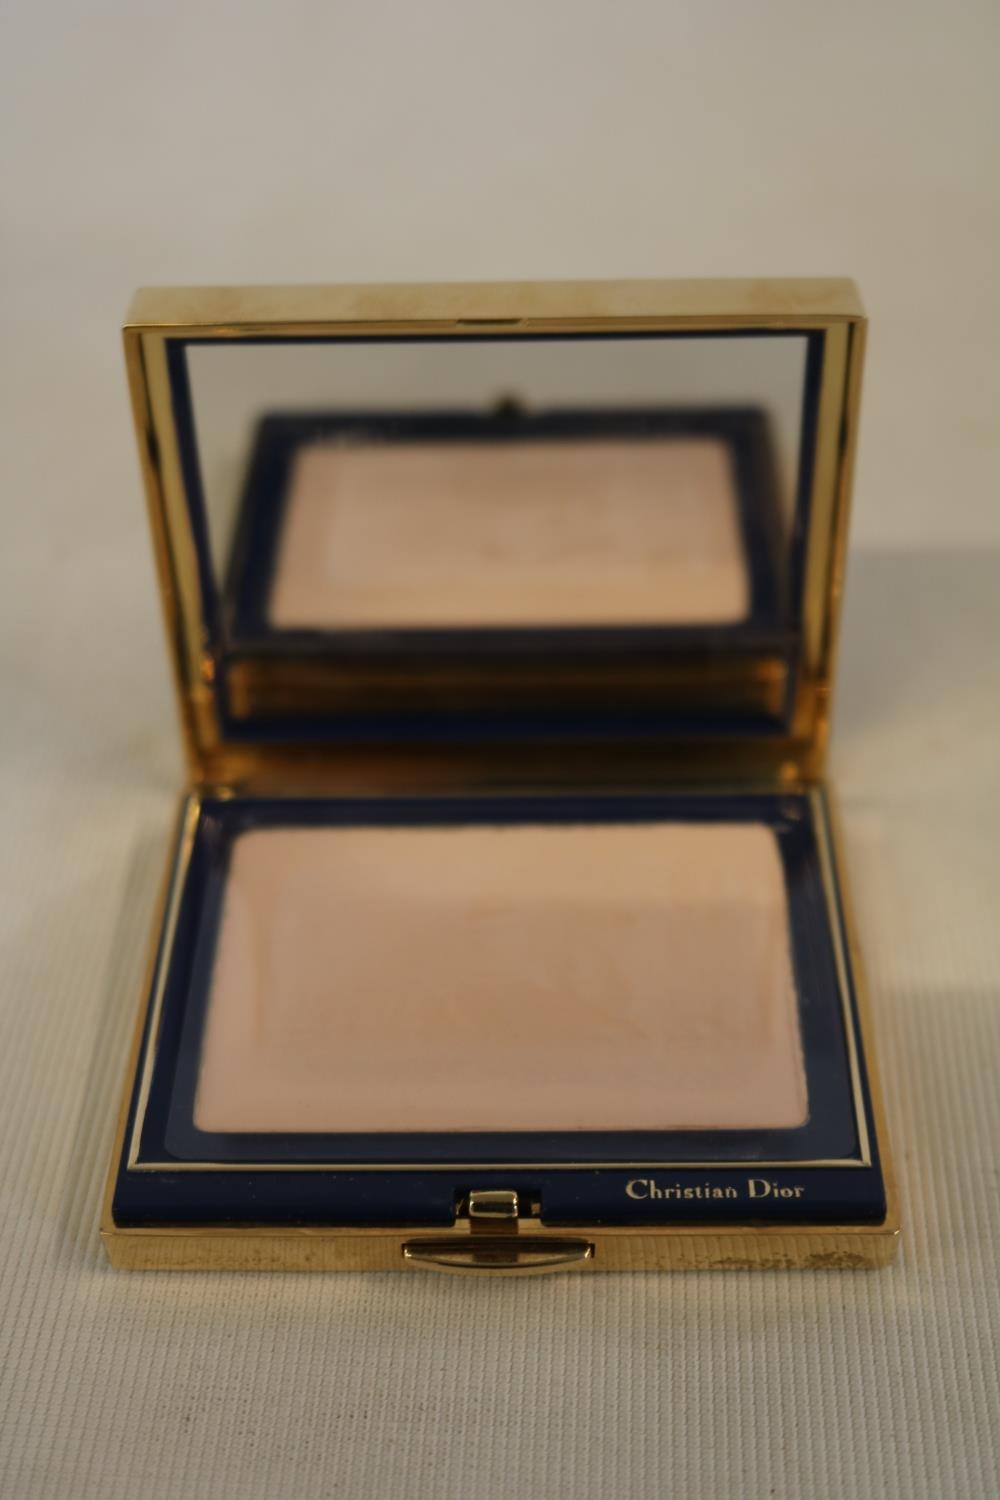 Christian Dior of Paris Refillable Luxury Powder Compact Boxed and a Chanel Compact - Image 3 of 5